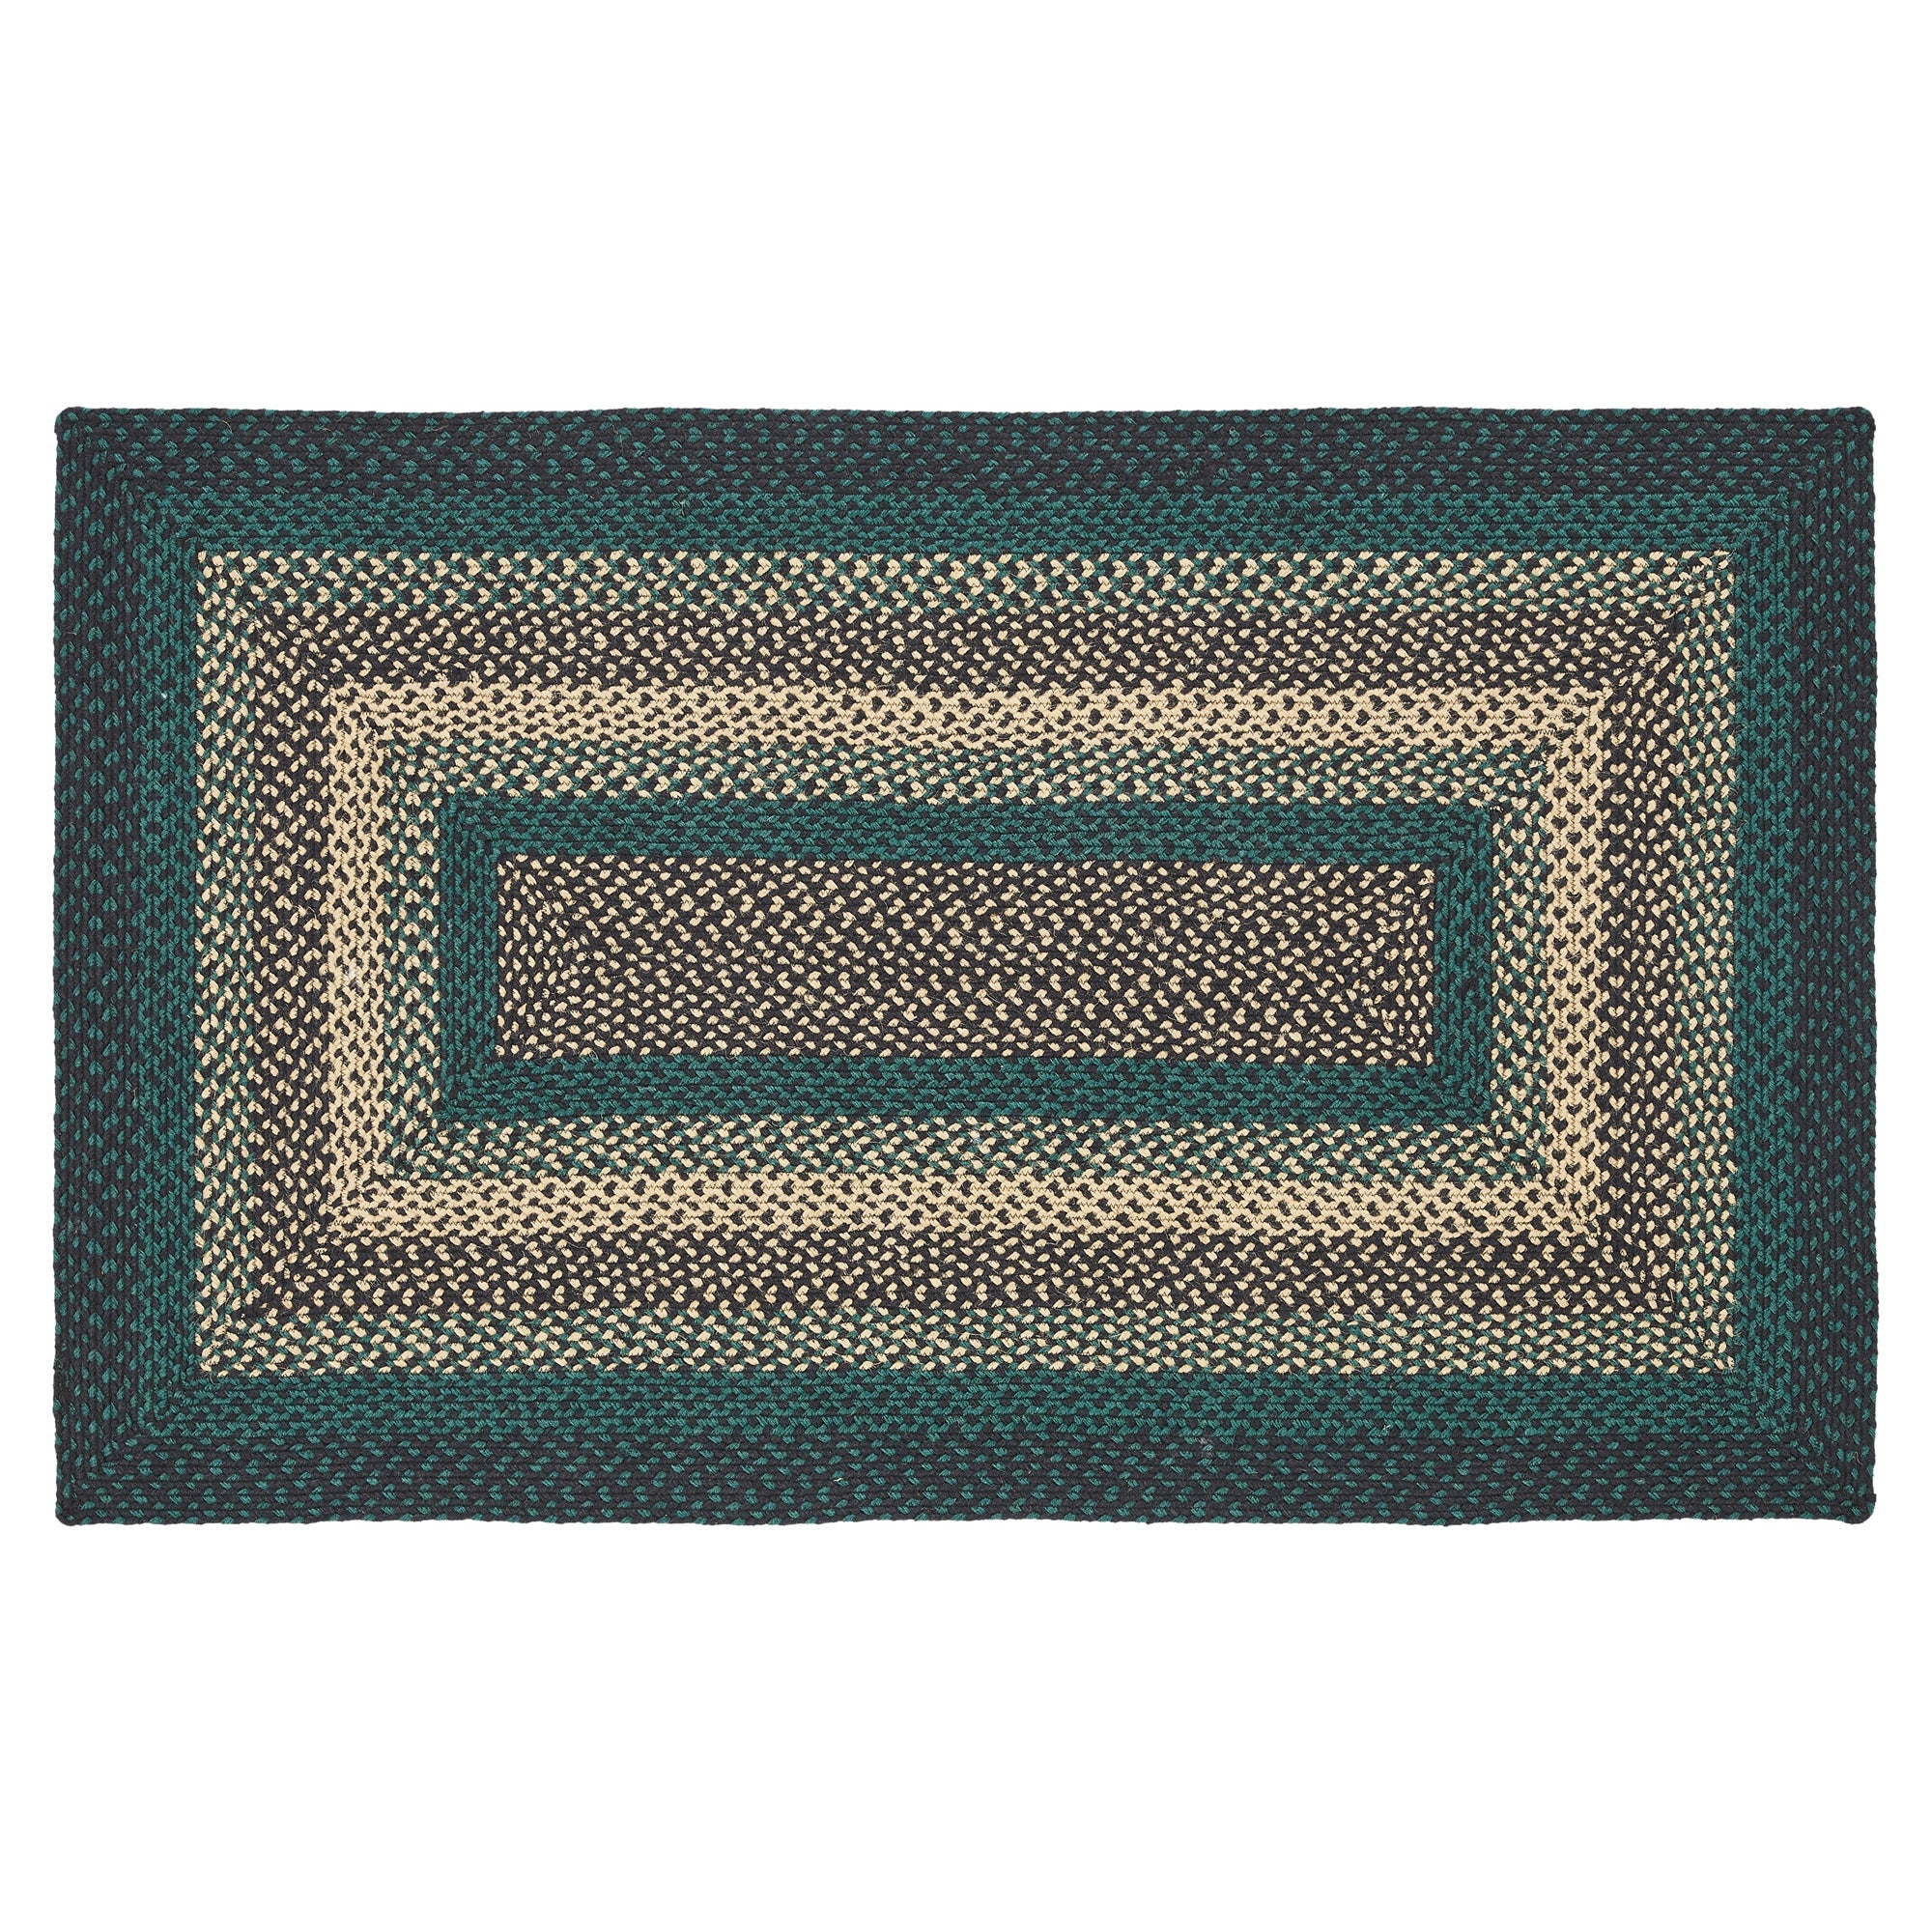 Pine Grove Jute Braided Rug Rect. with Rug Pad 3'x5' VHC Brands